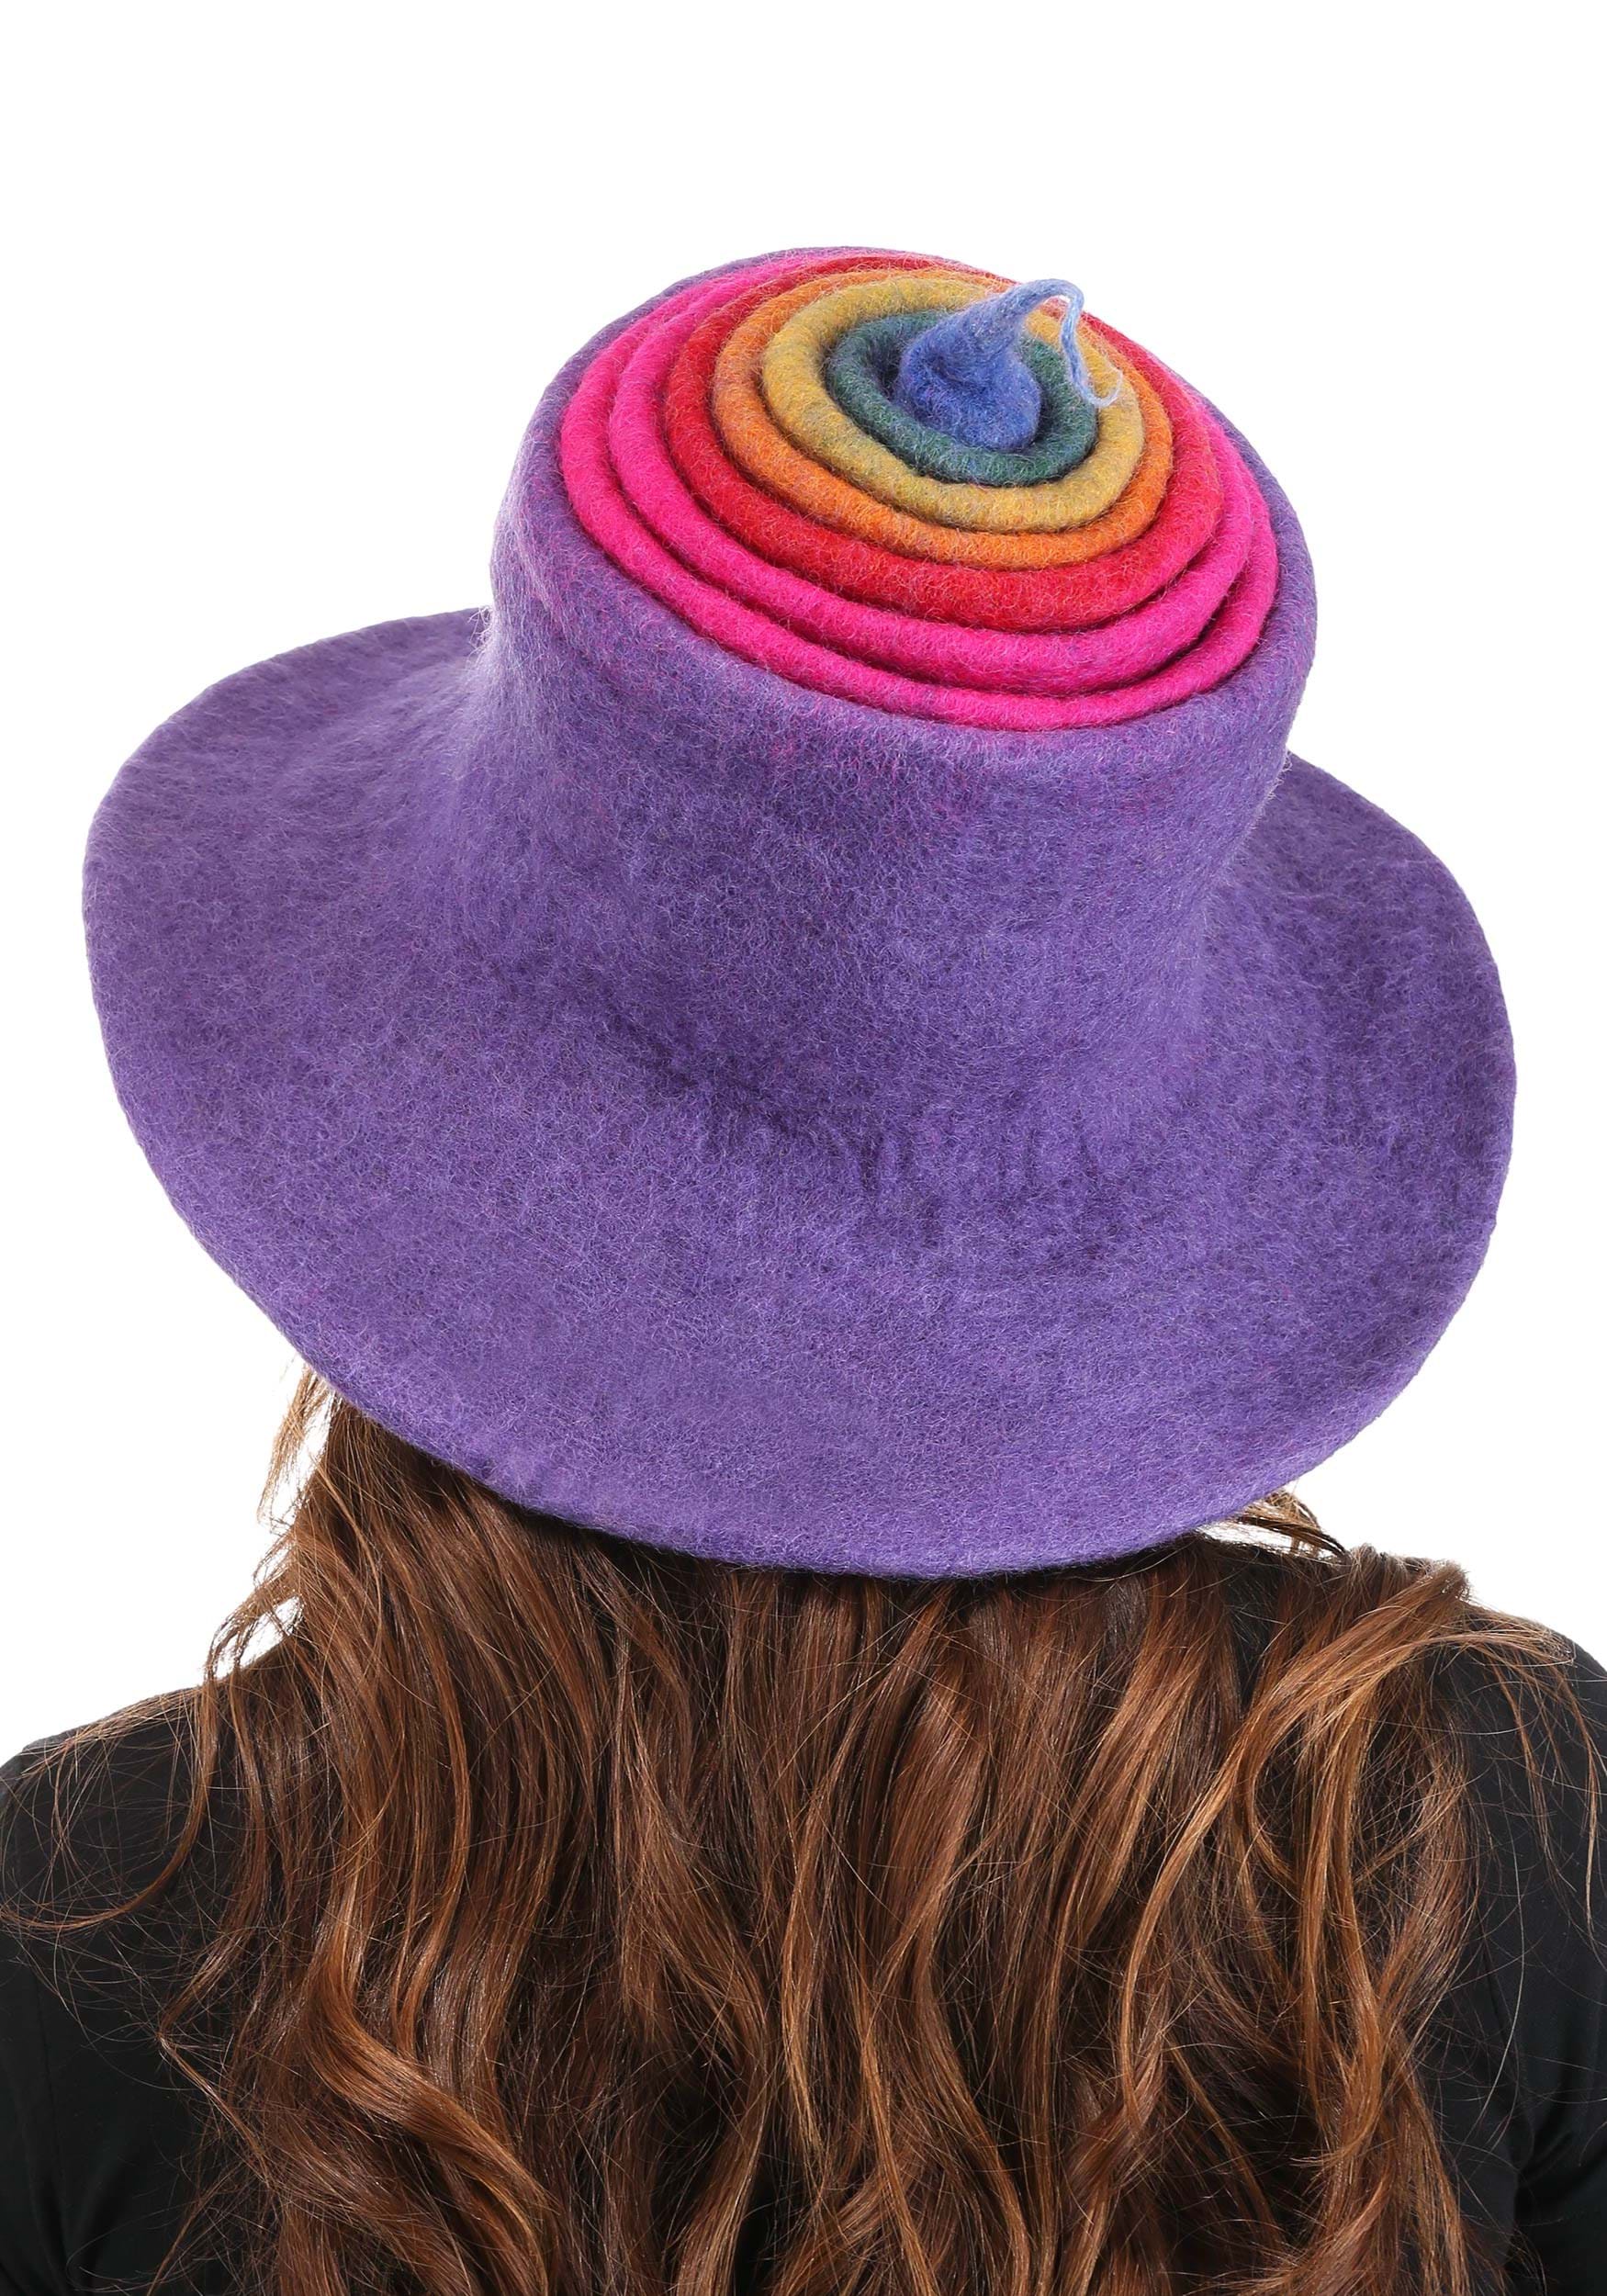 Rainbow Borealis Heartfelted Witch Fancy Dress Costume Hat For Adults